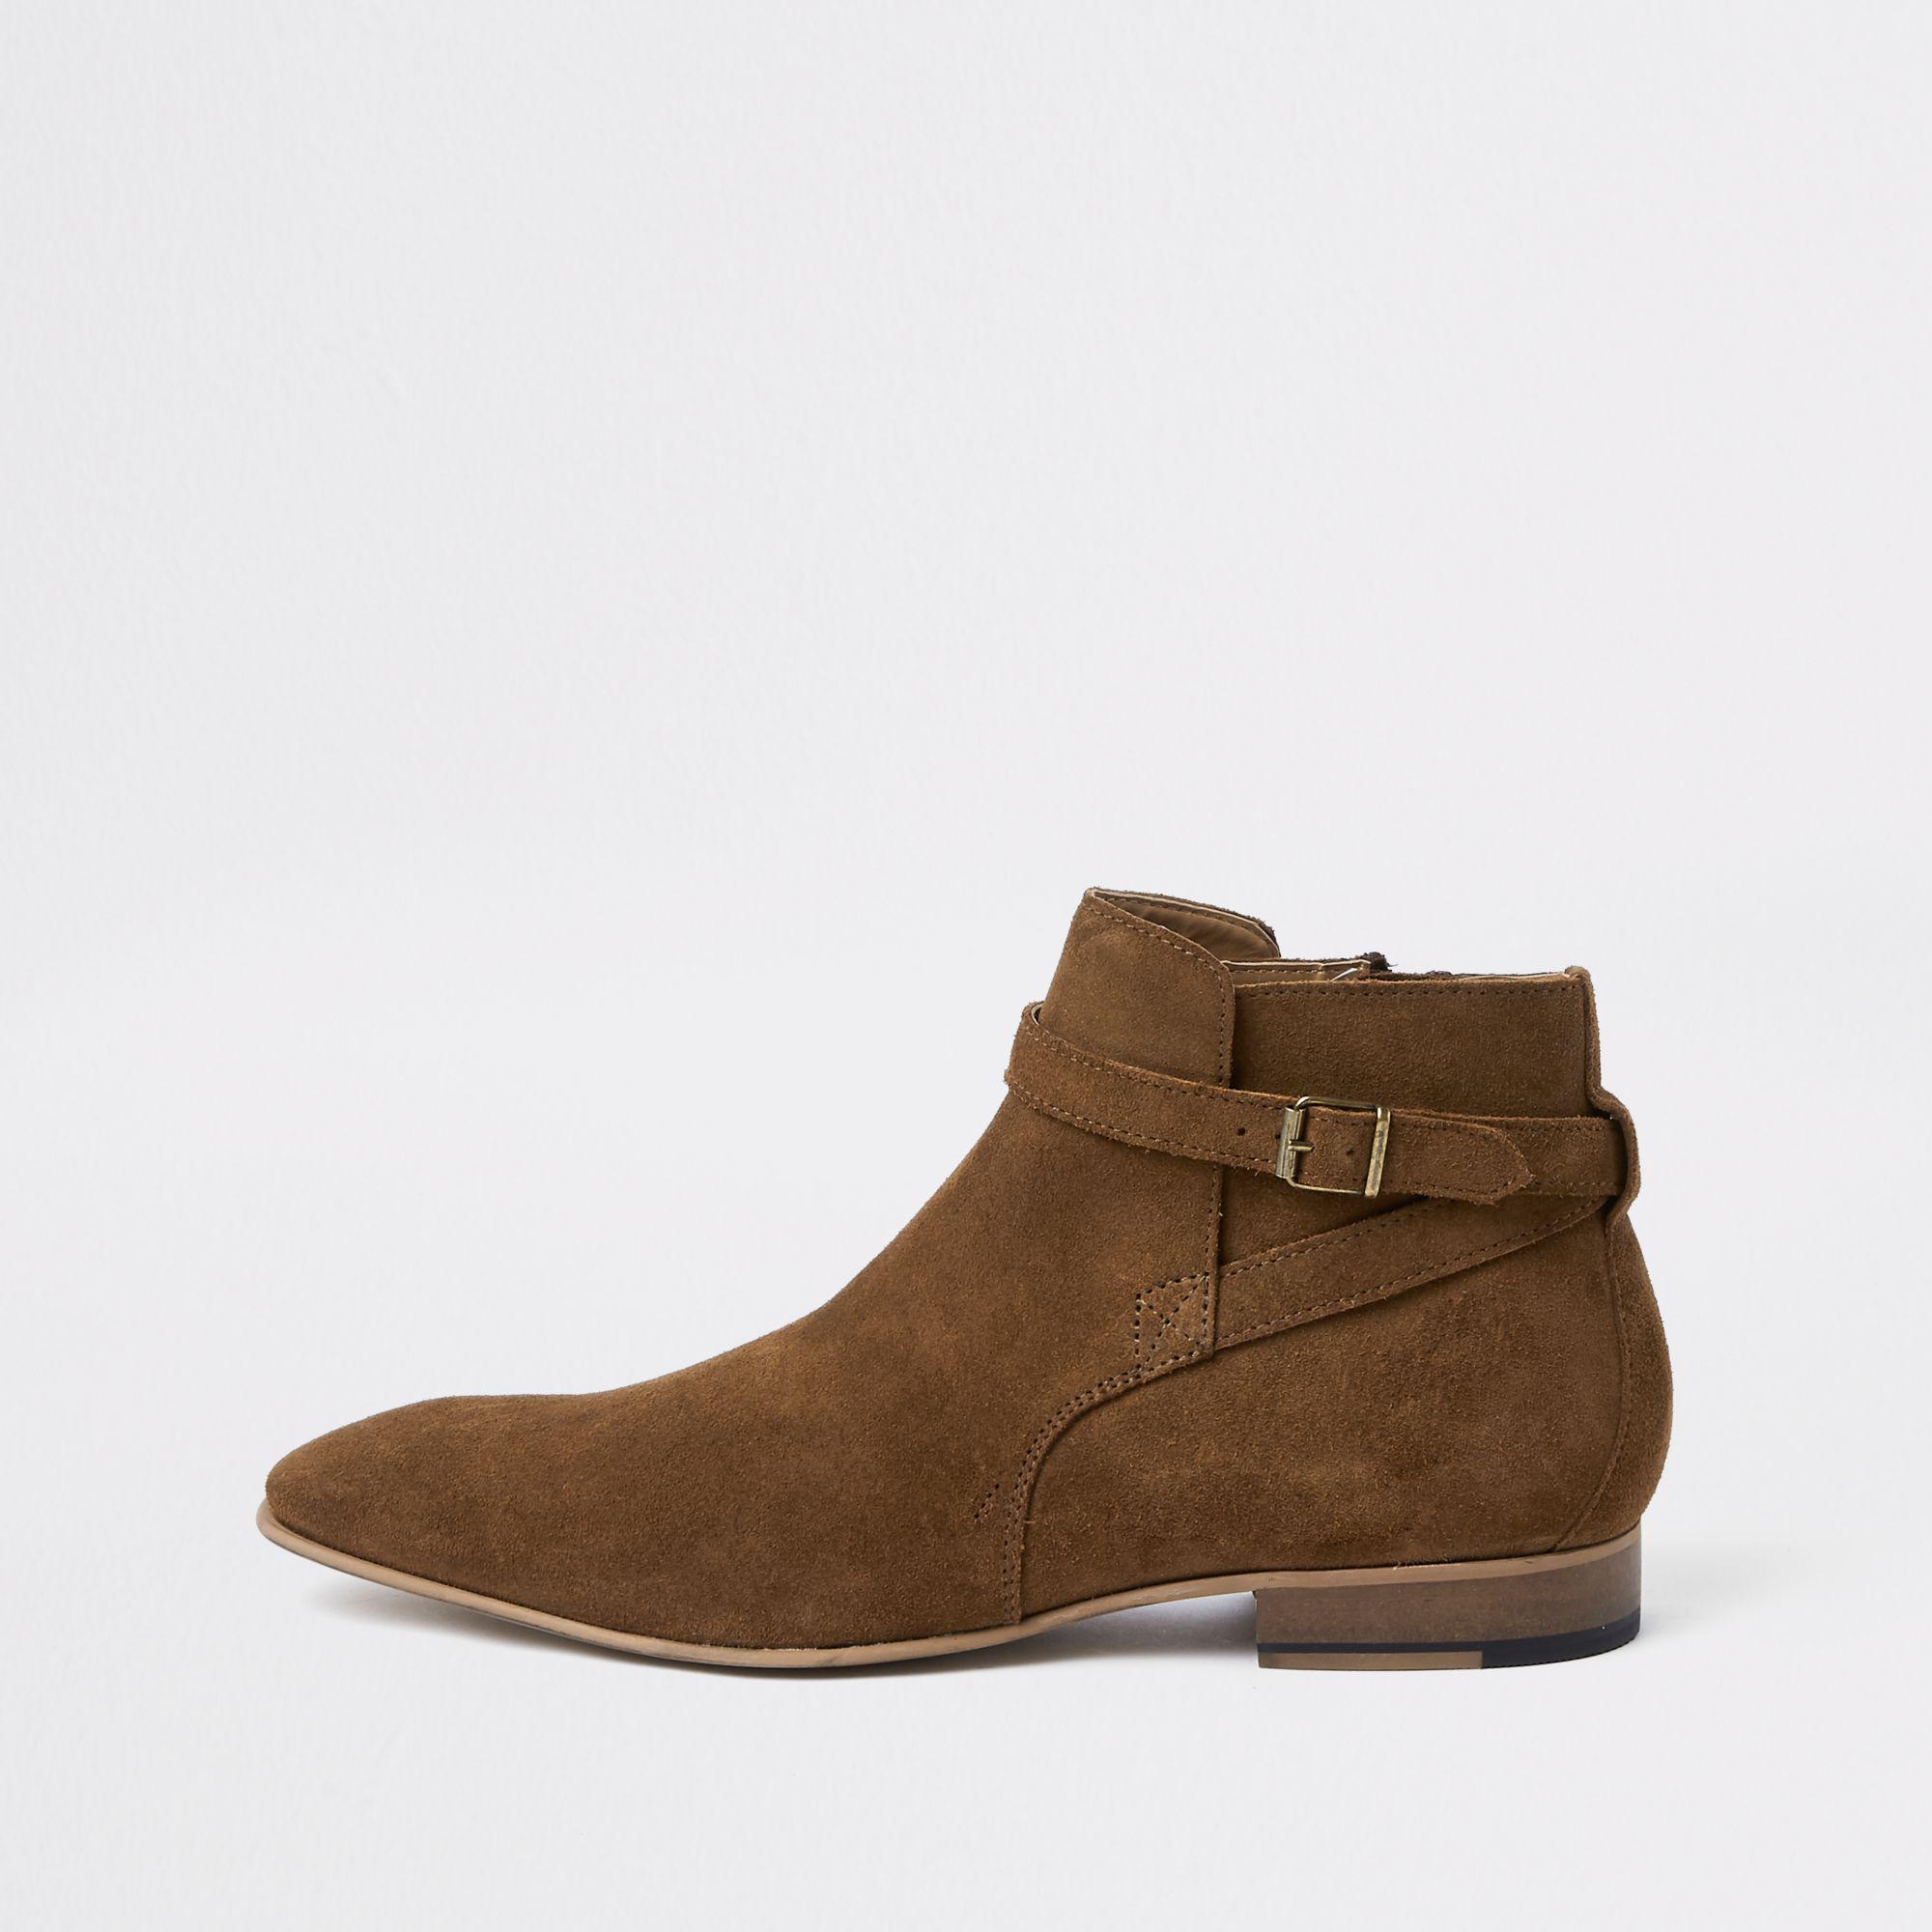 River Island Brown Suede Buckle Chelsea Boots for Men - Lyst